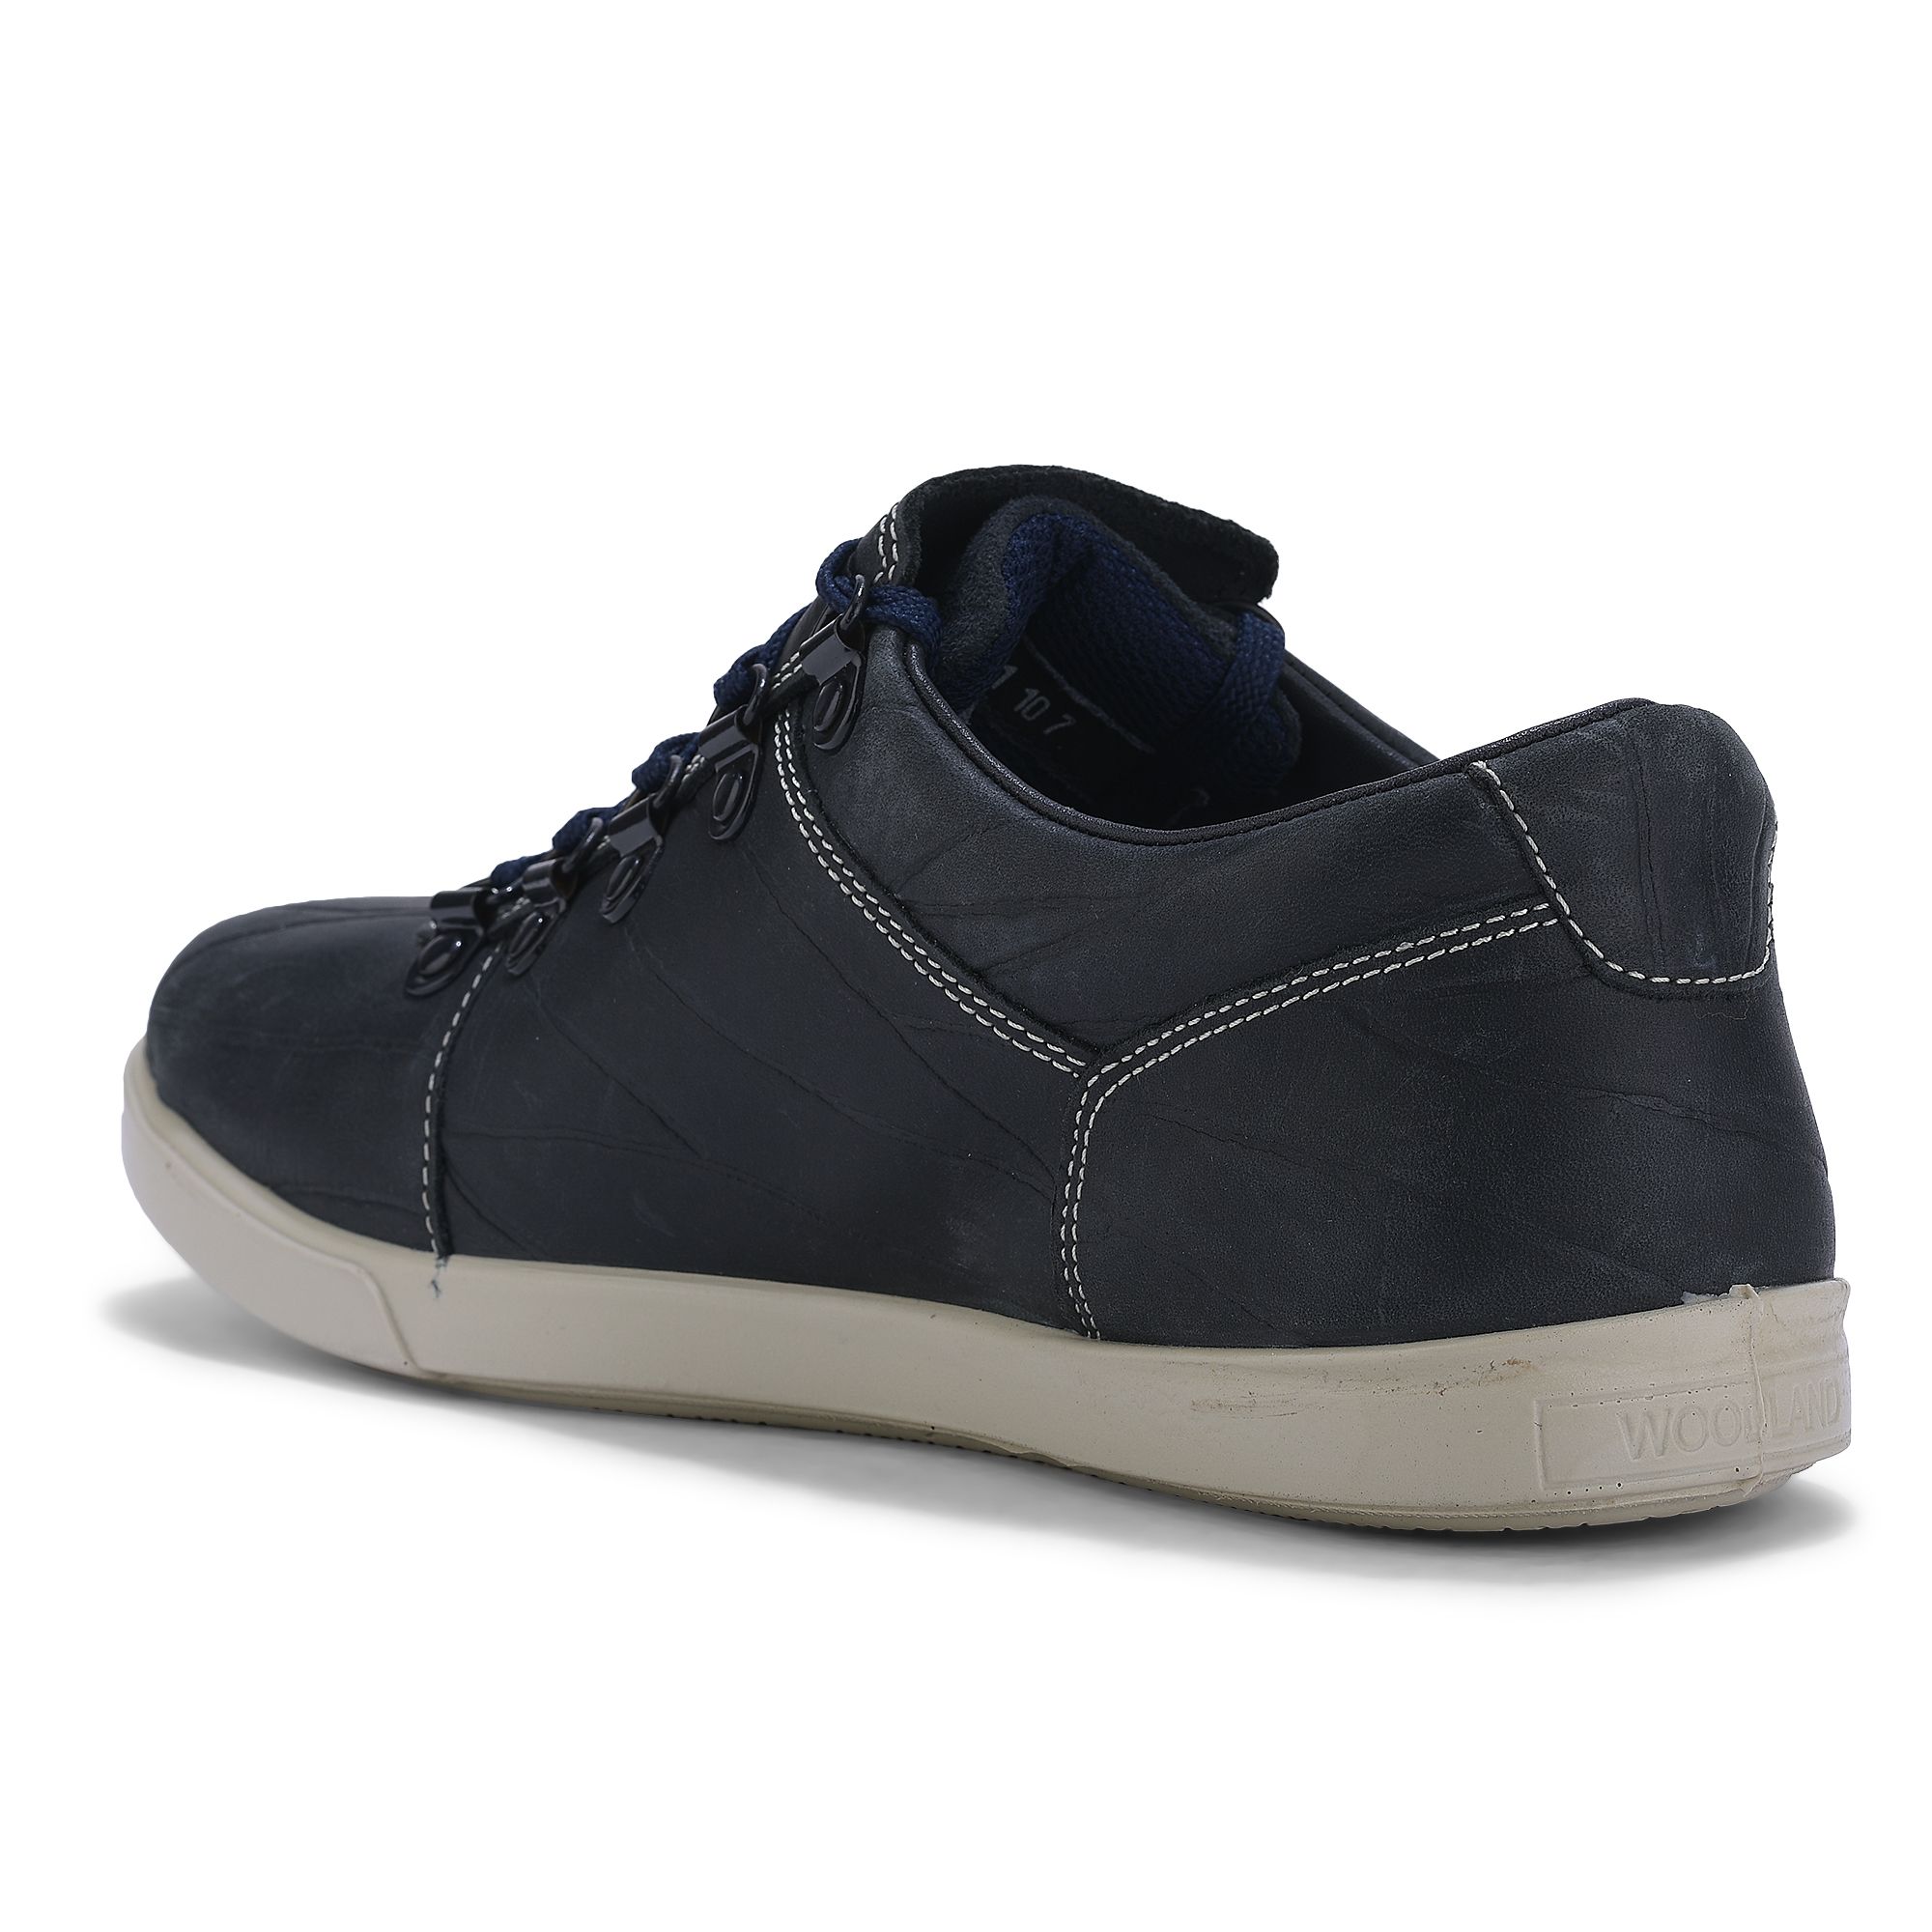 Woodland DNavy 4 casual shoes